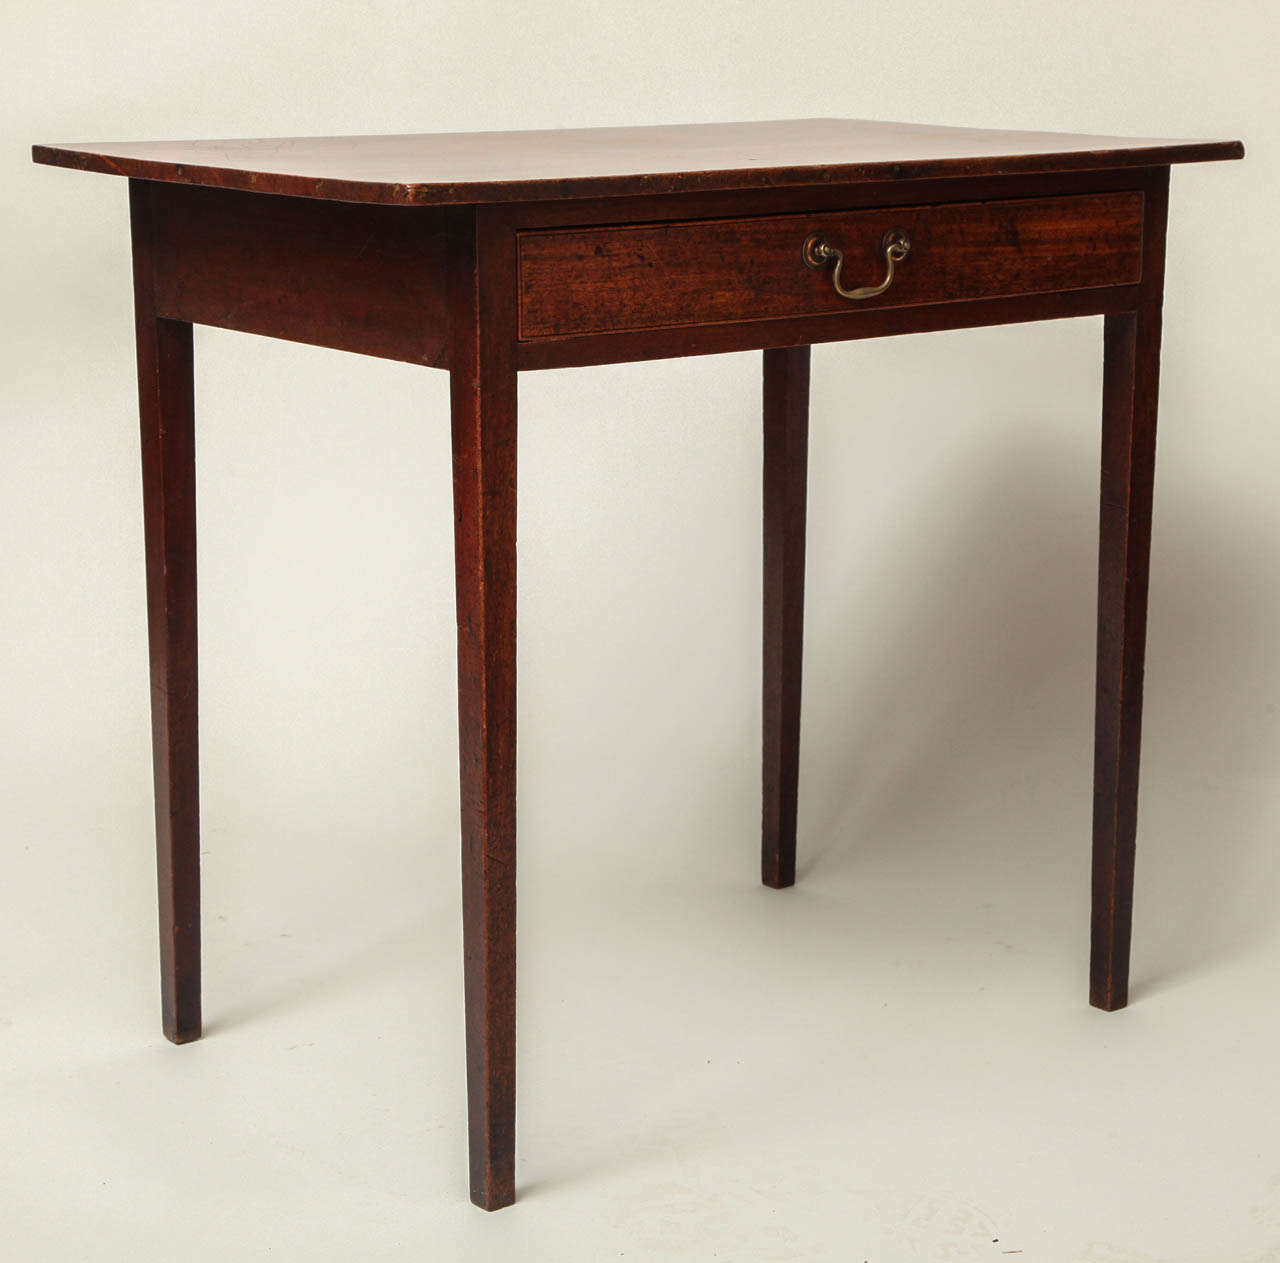 A fine Georgian mahogany side table, the single board mahogany top over single drawer having a beaded edge and original swan neck pull on square tapering legs, the whole with lovely warm color and patination.